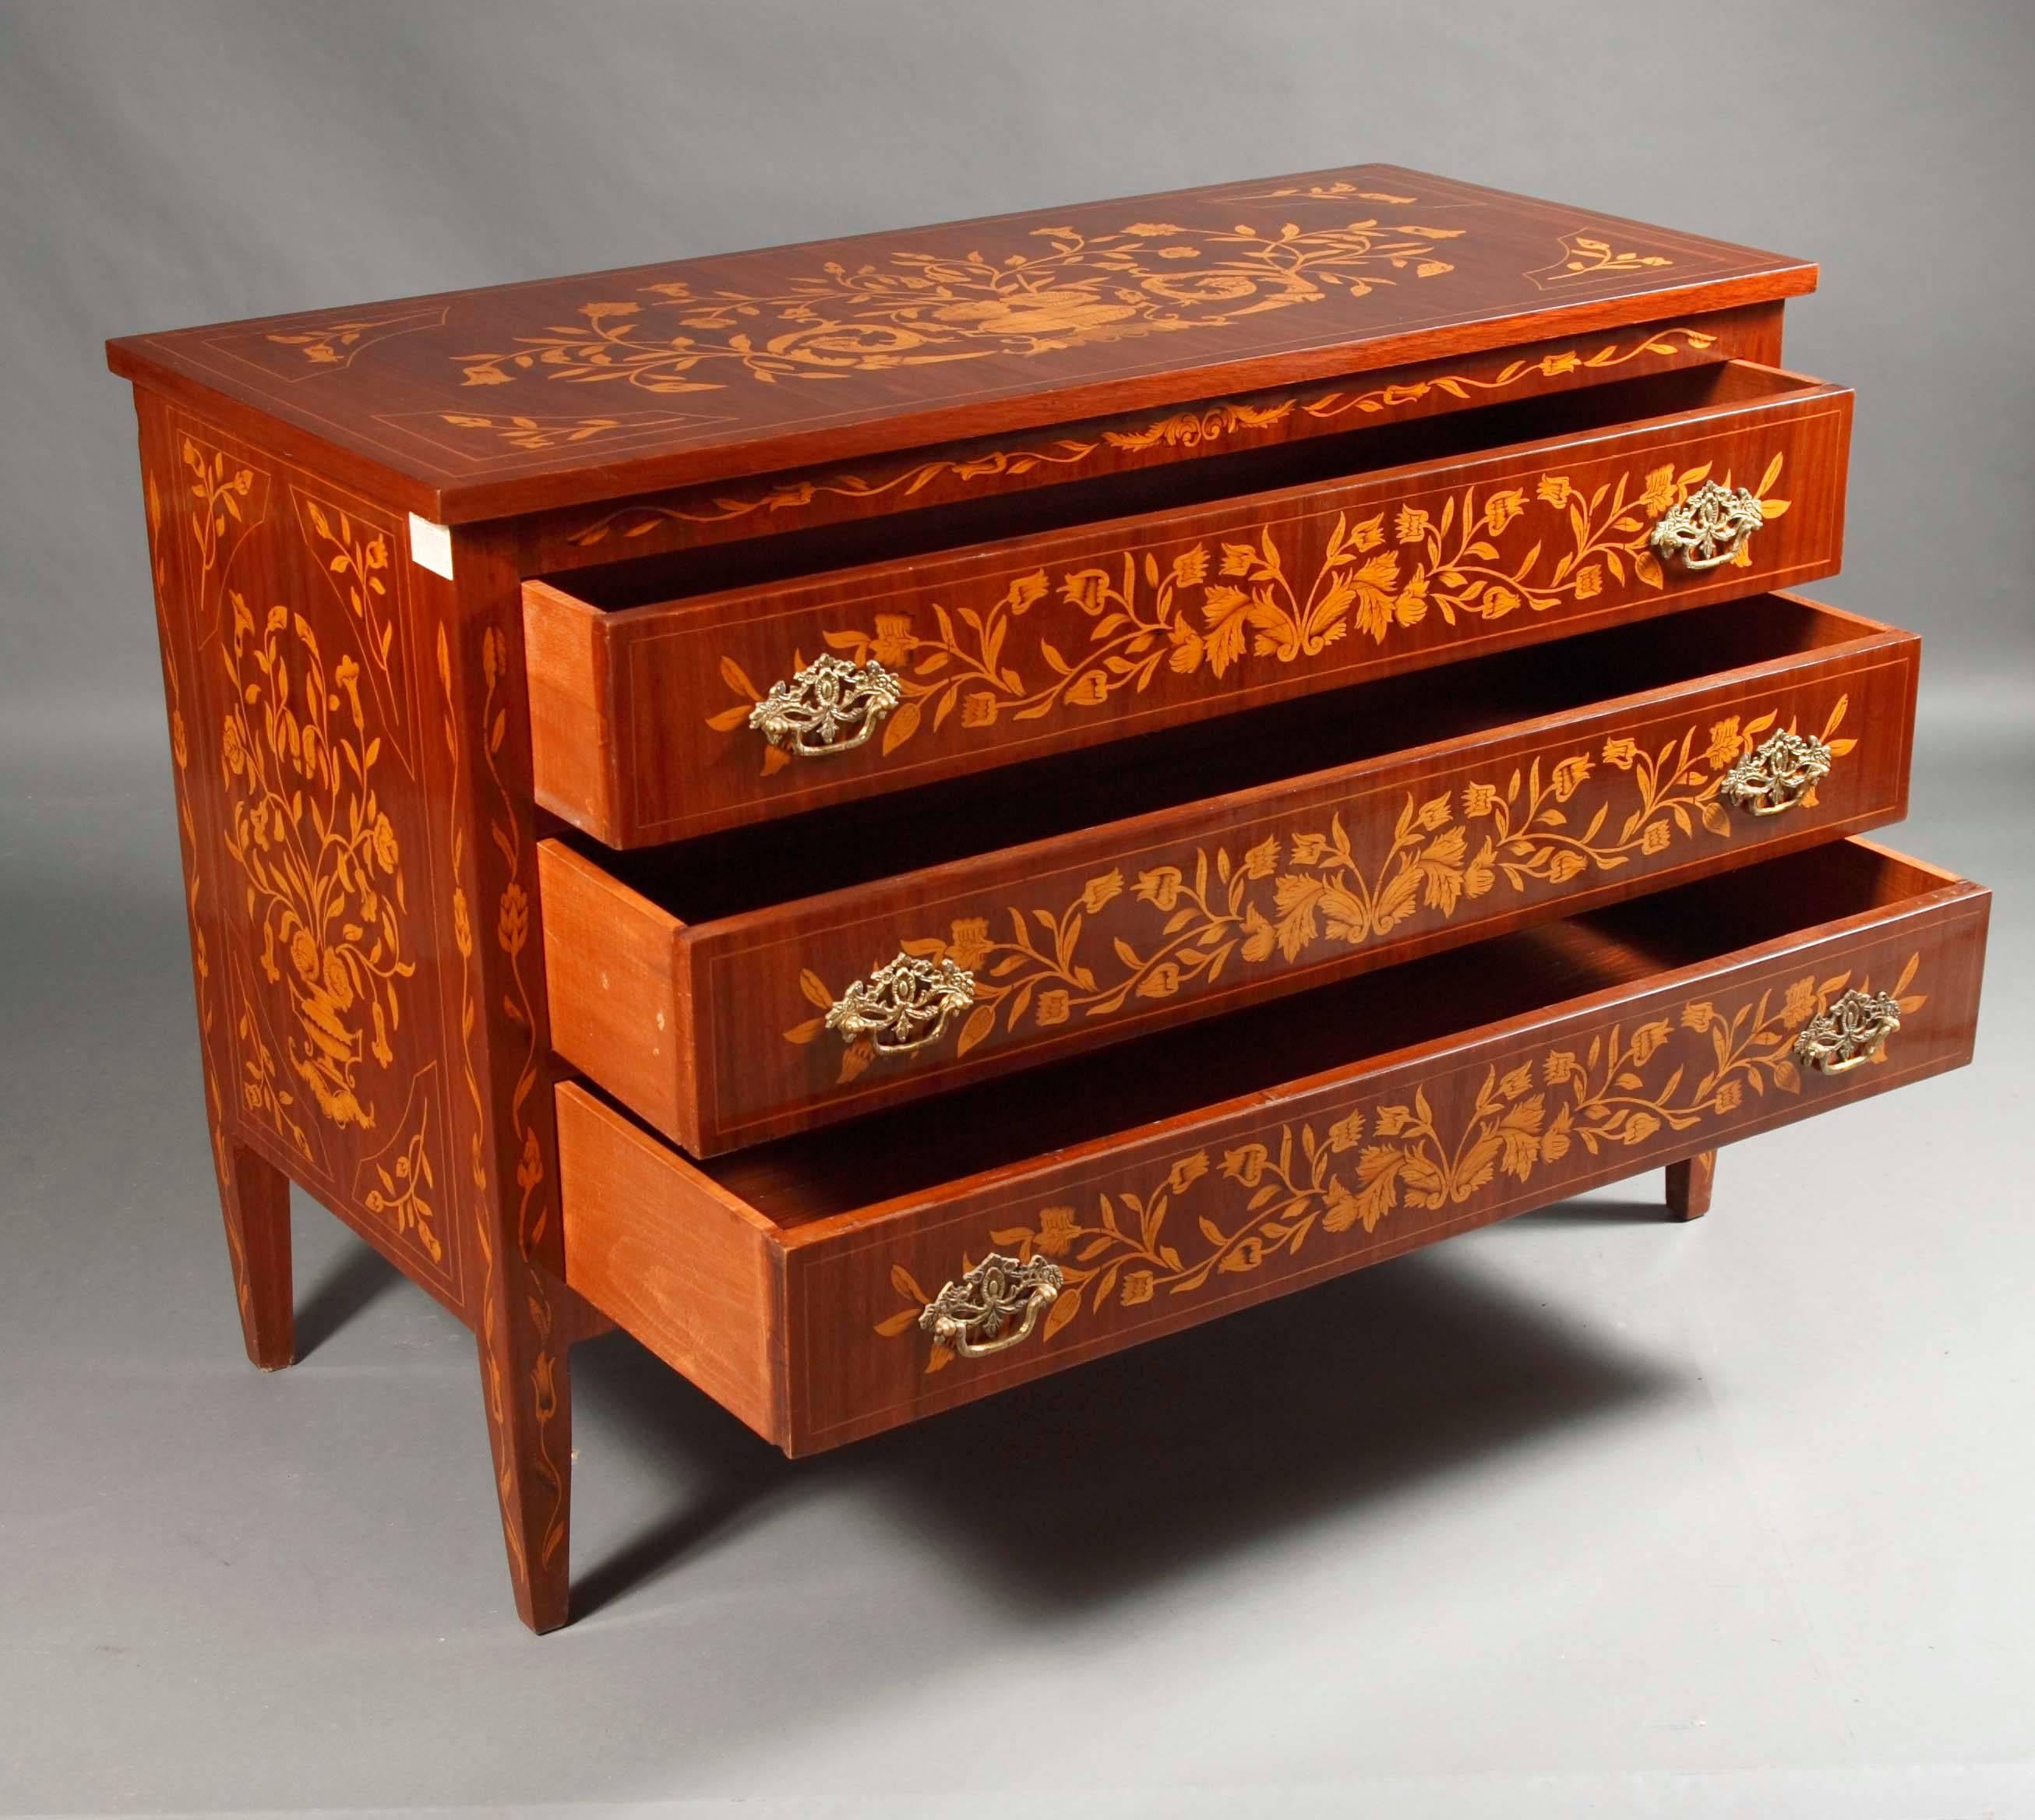 Marquetry Inlaid Commode in Neoclassical Style, Mahagony and Maple Veneer (Deutsch)